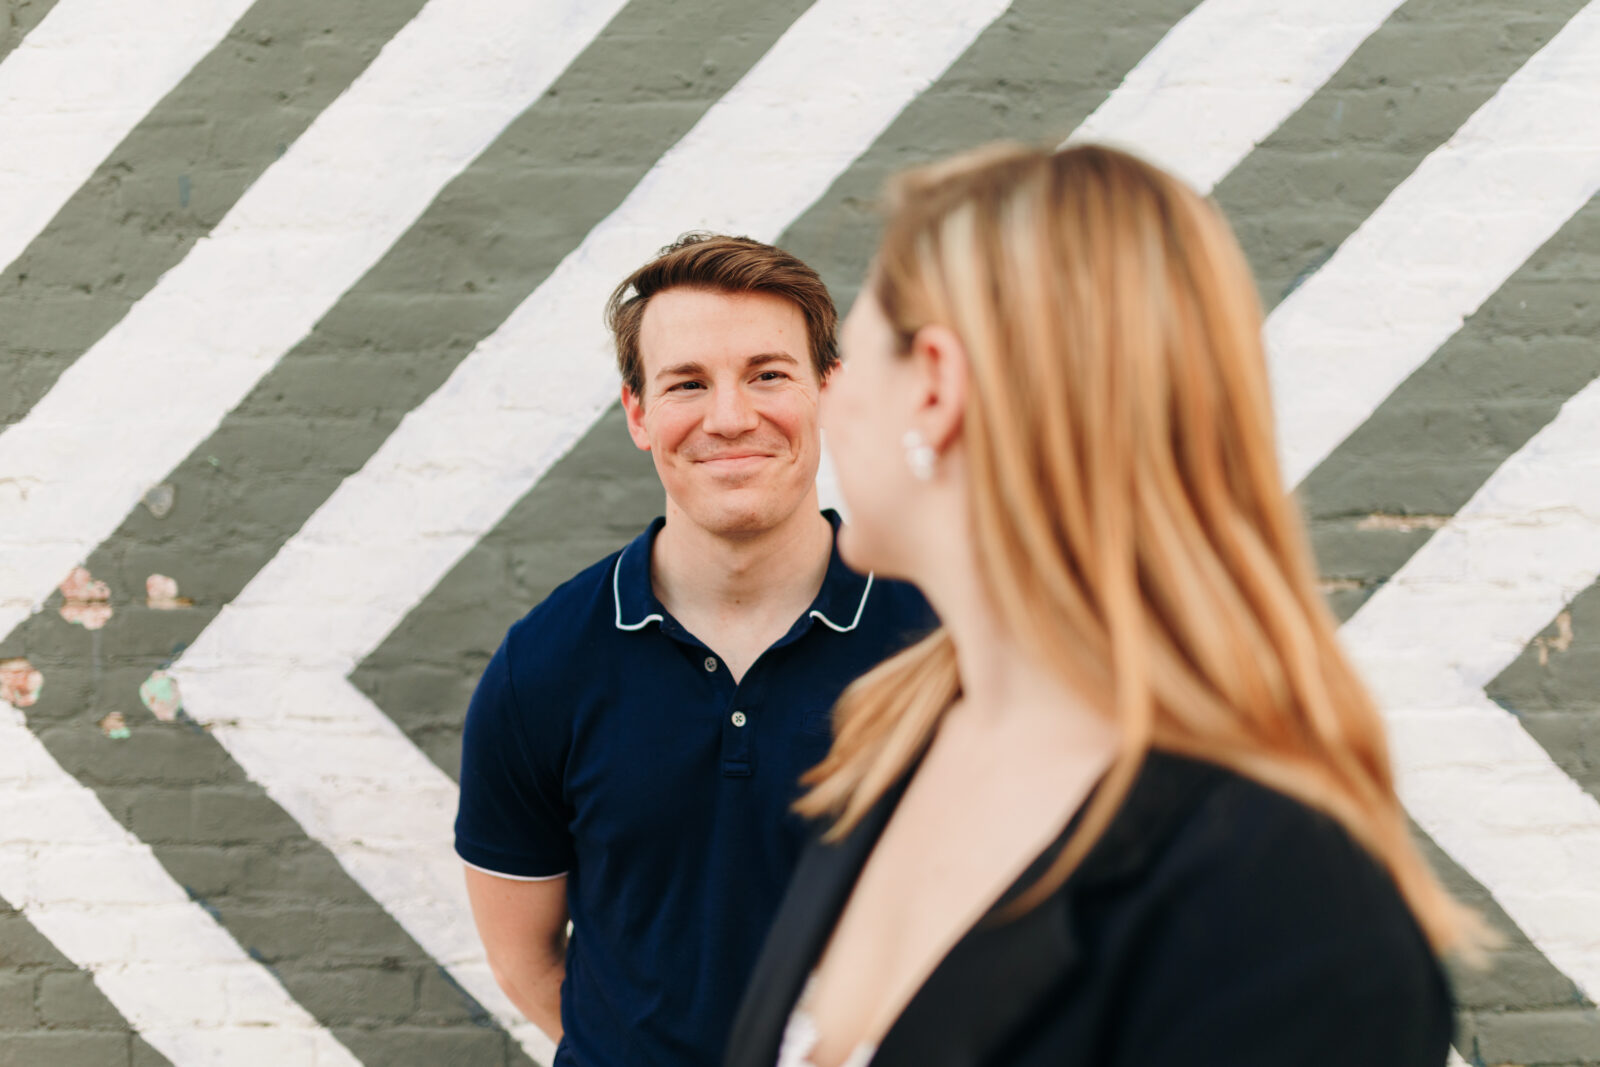 An engaged couple smiling at each other in front of a mural along South Main Street in Memphis, featuring one partner in the background